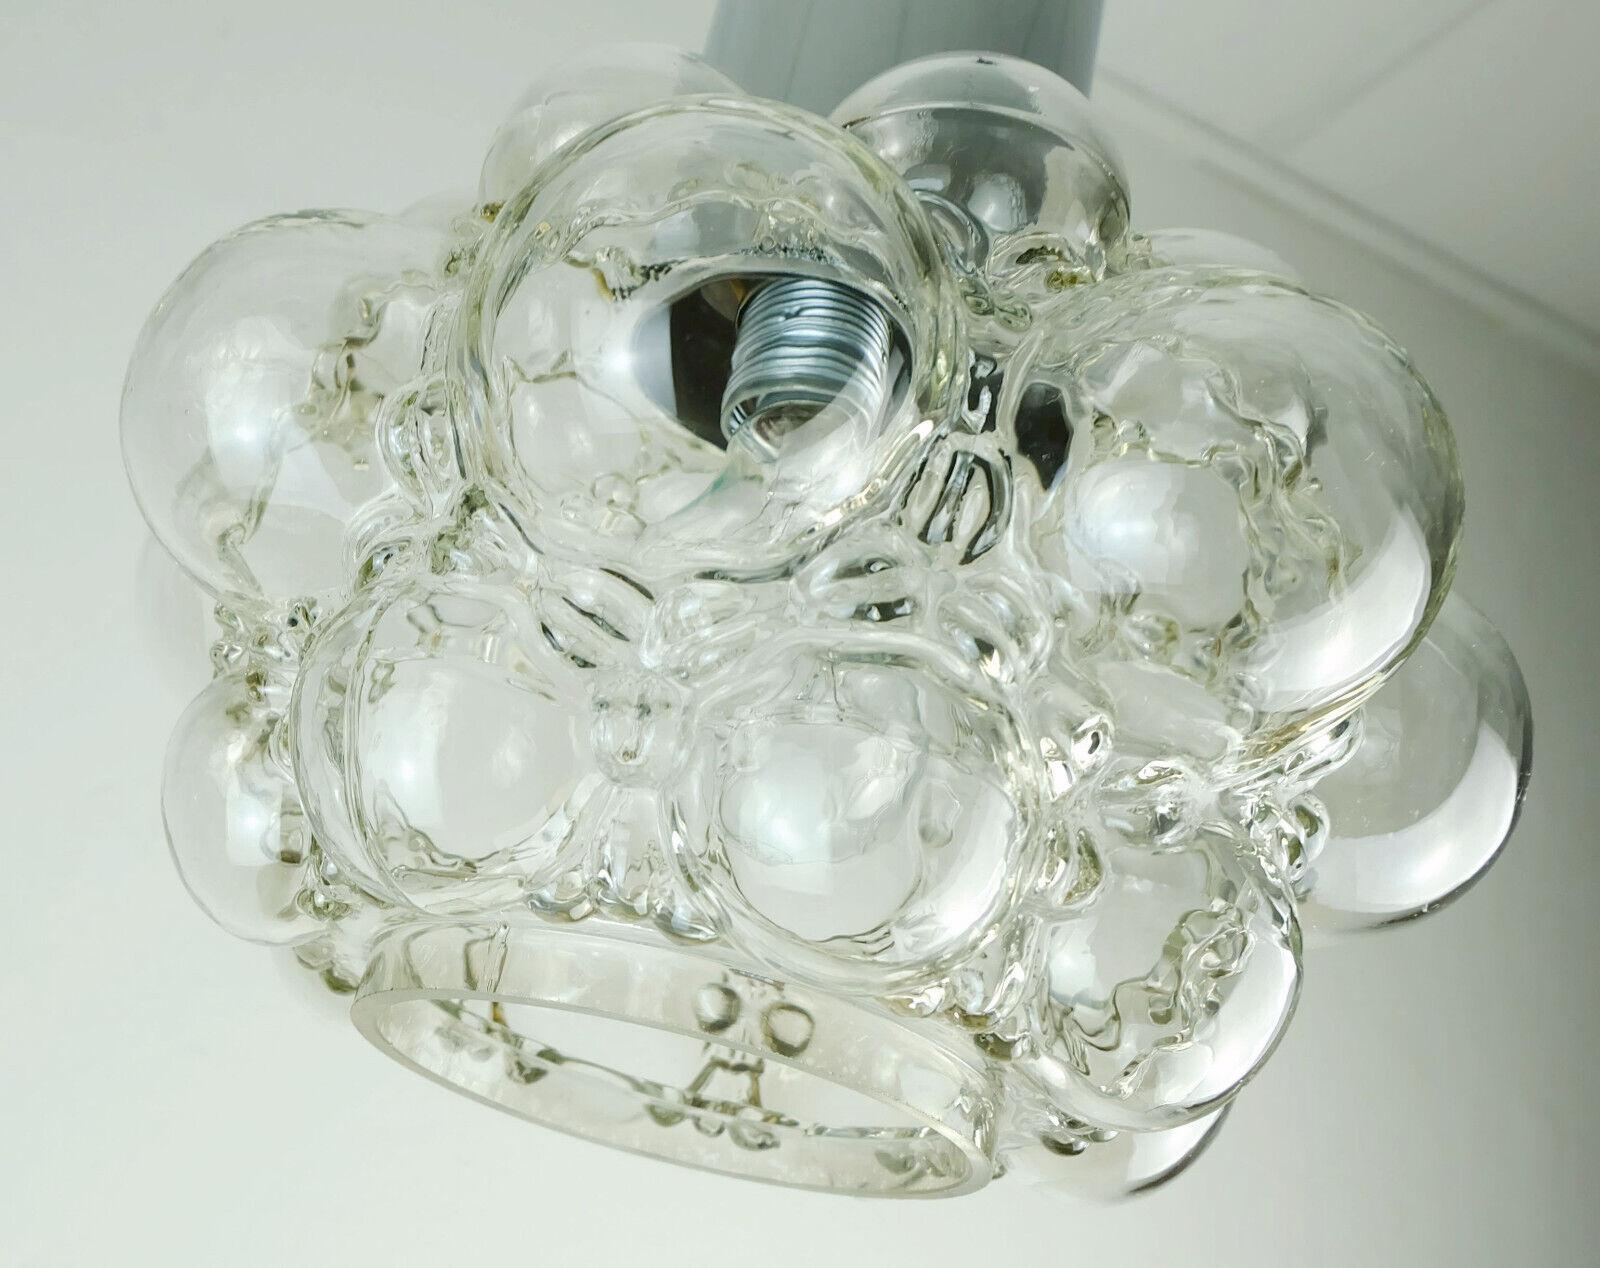 Glass helena tynell 1960's mid century limburg P308 bubble glass PENDANT LIGHT clear g For Sale